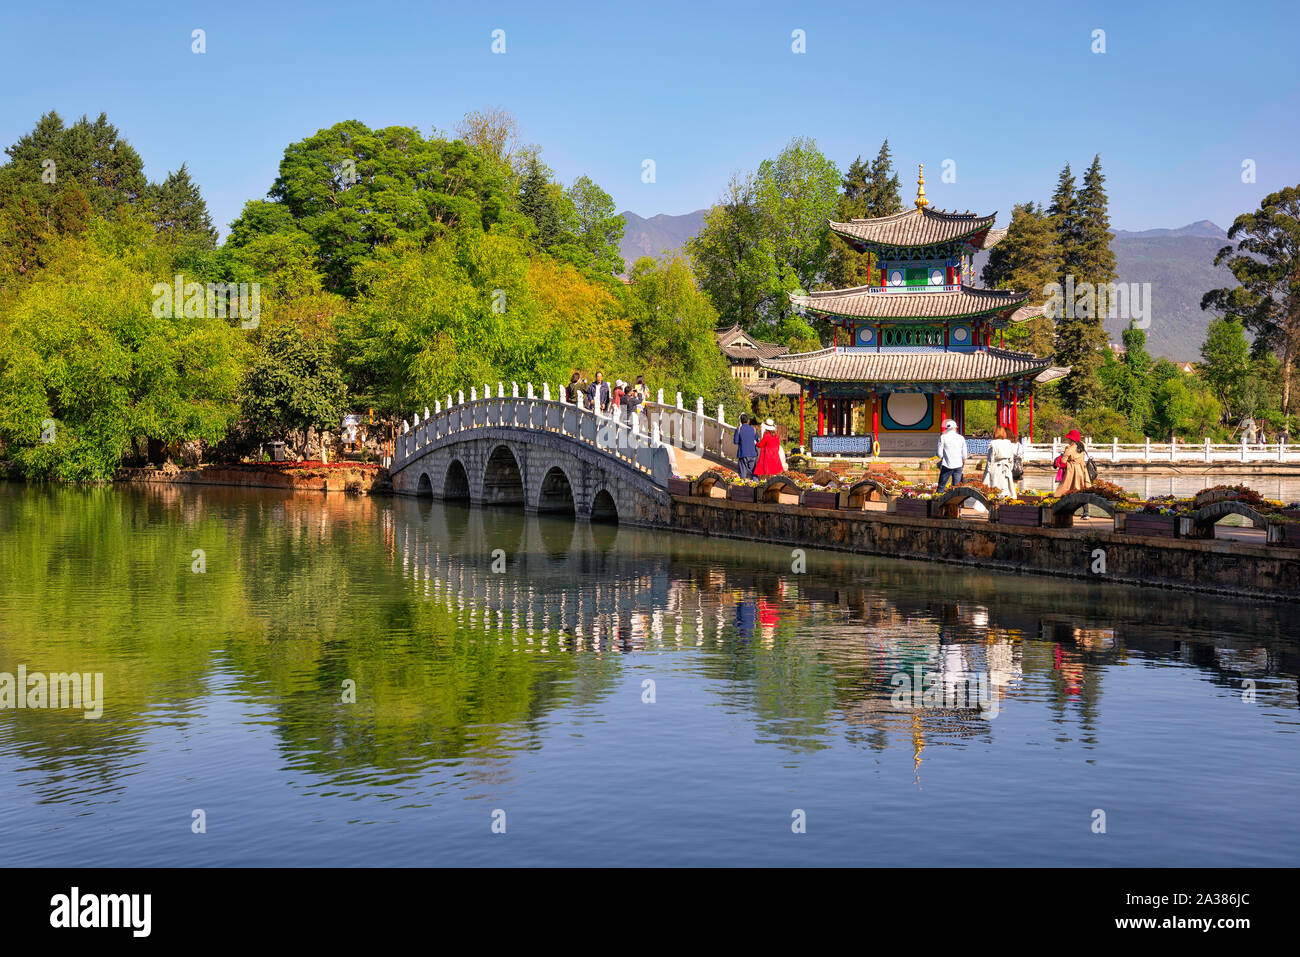 Lijiang, China - April 27, 2019: Tourists over the Suocui bridge with Moon Embracing Pavilion on the background. Stock Photo